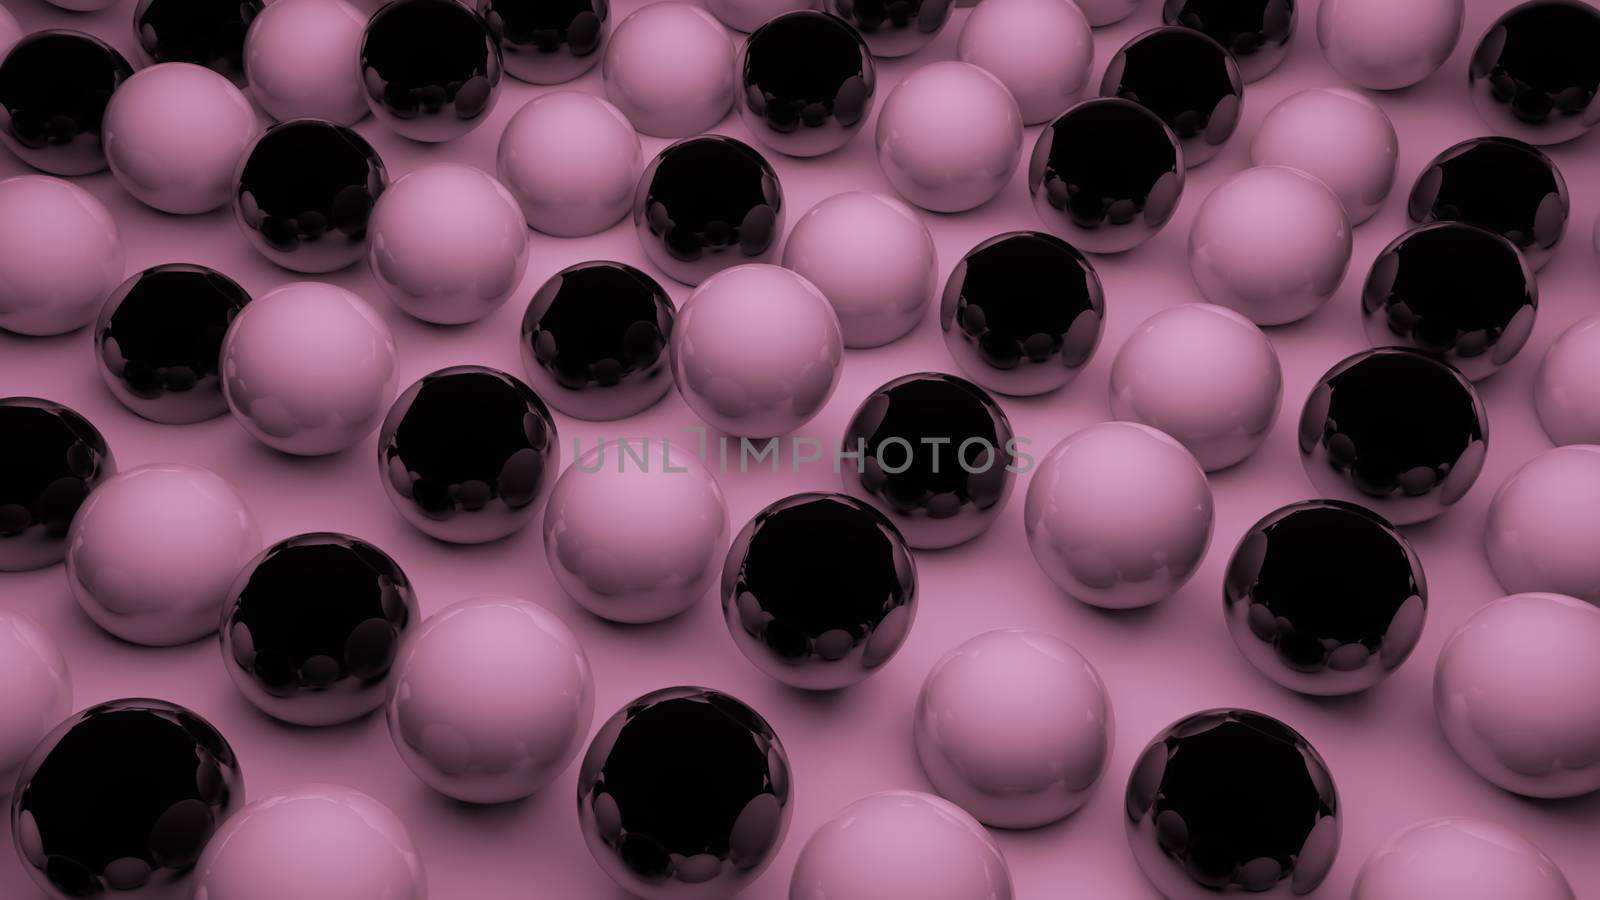 Realistic balls lie on the floor. 3D rendered